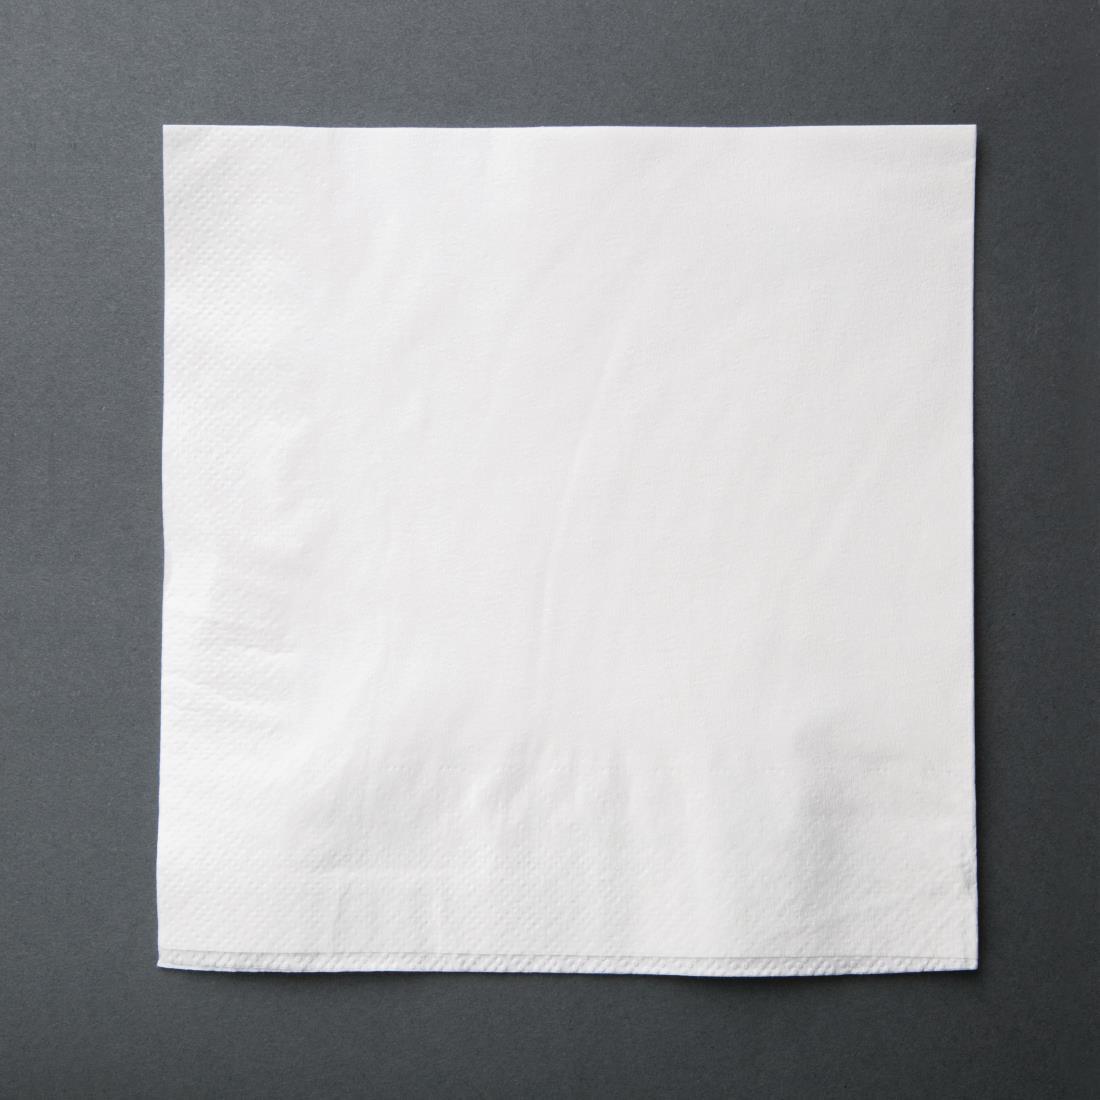 Fiesta Recyclable Lunch Napkin White 30x30cm 2ply 1/4 Fold (Pack of 250) - CM563  - 2